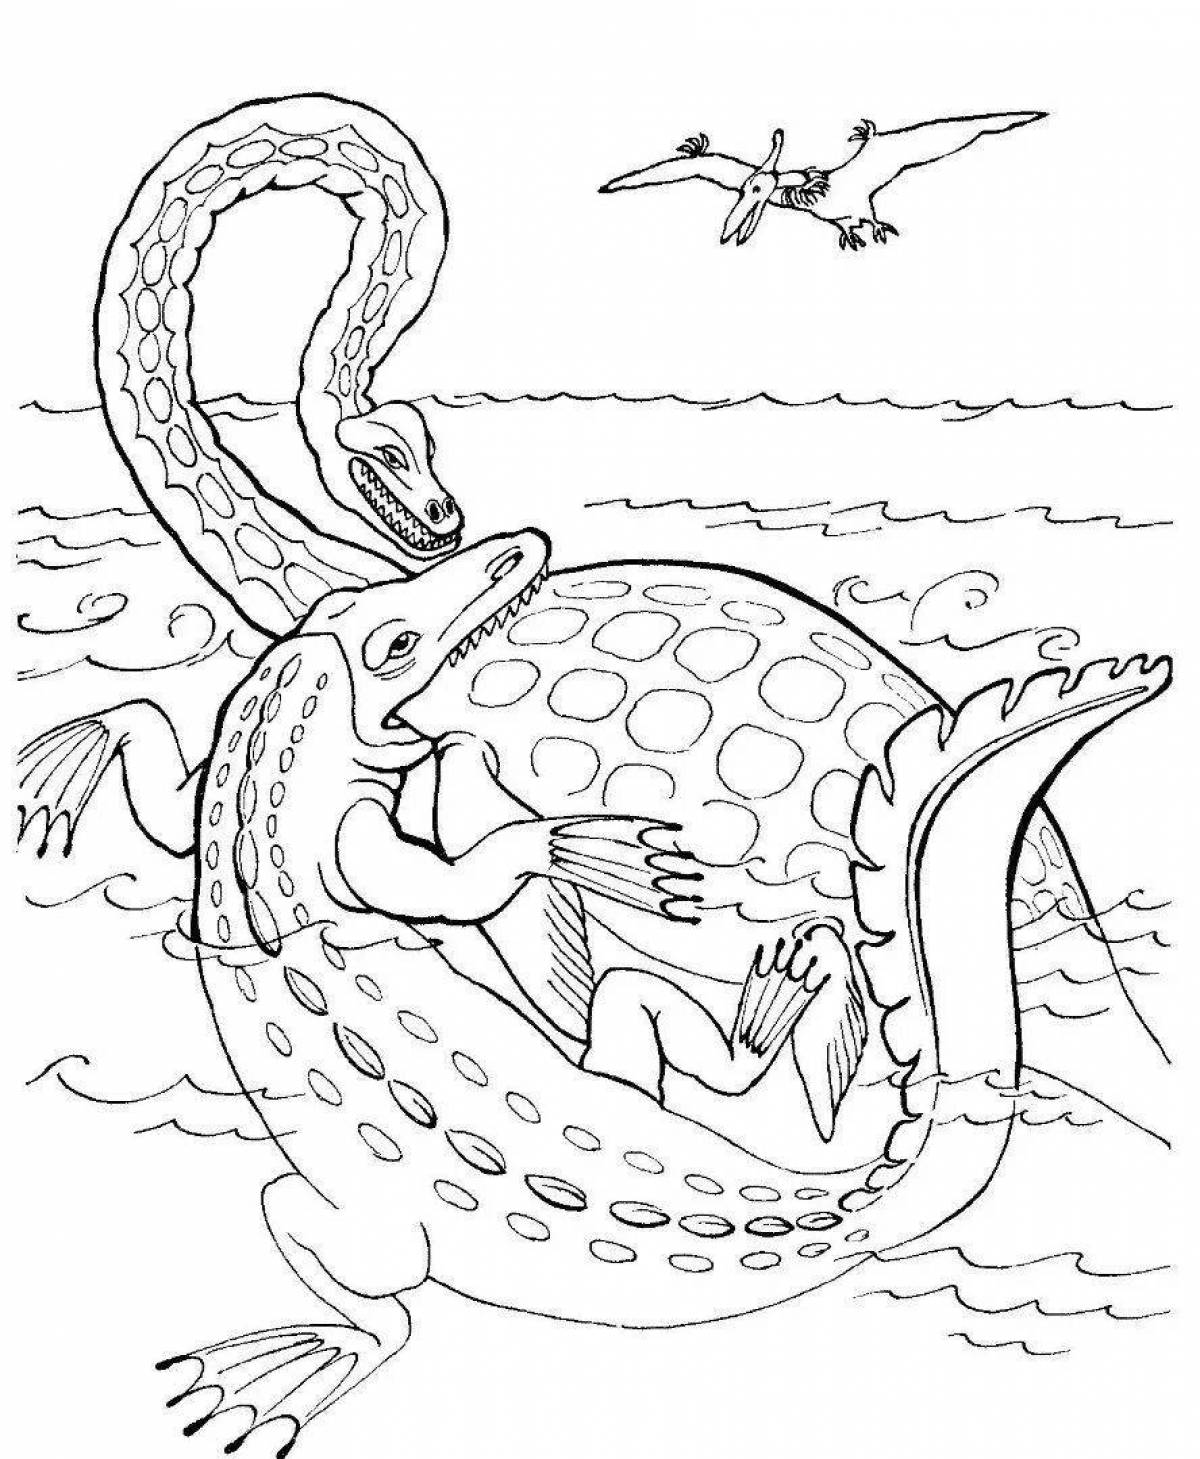 Playful underwater dinosaur coloring page